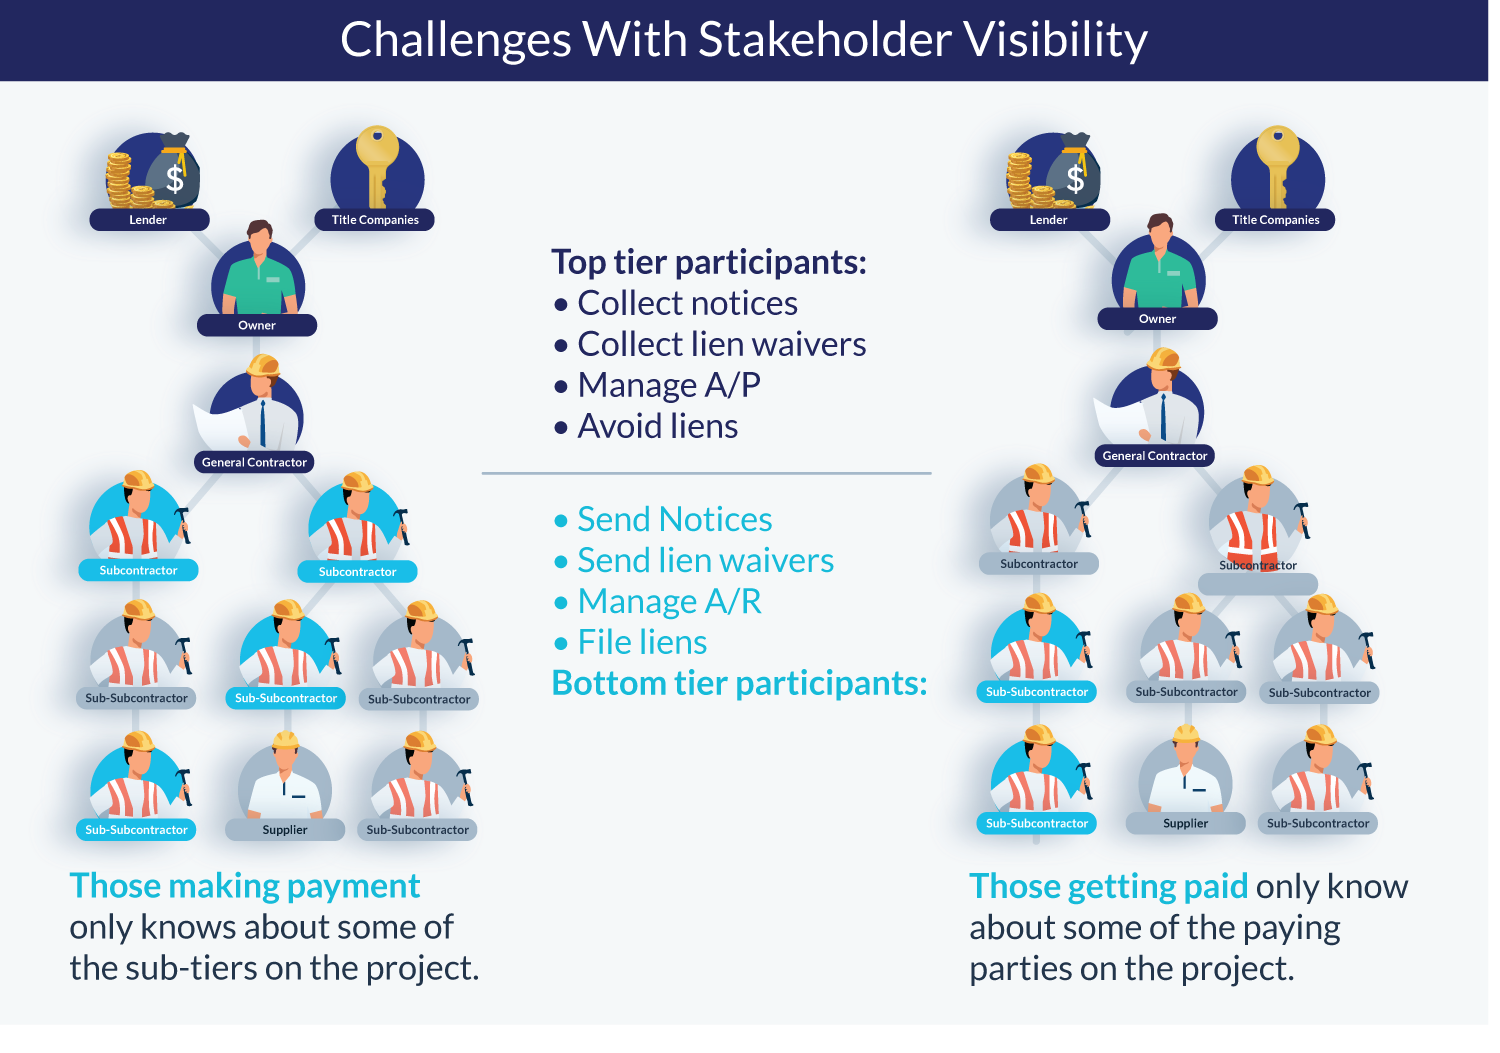 Stakeholder visibility is a problem in construction